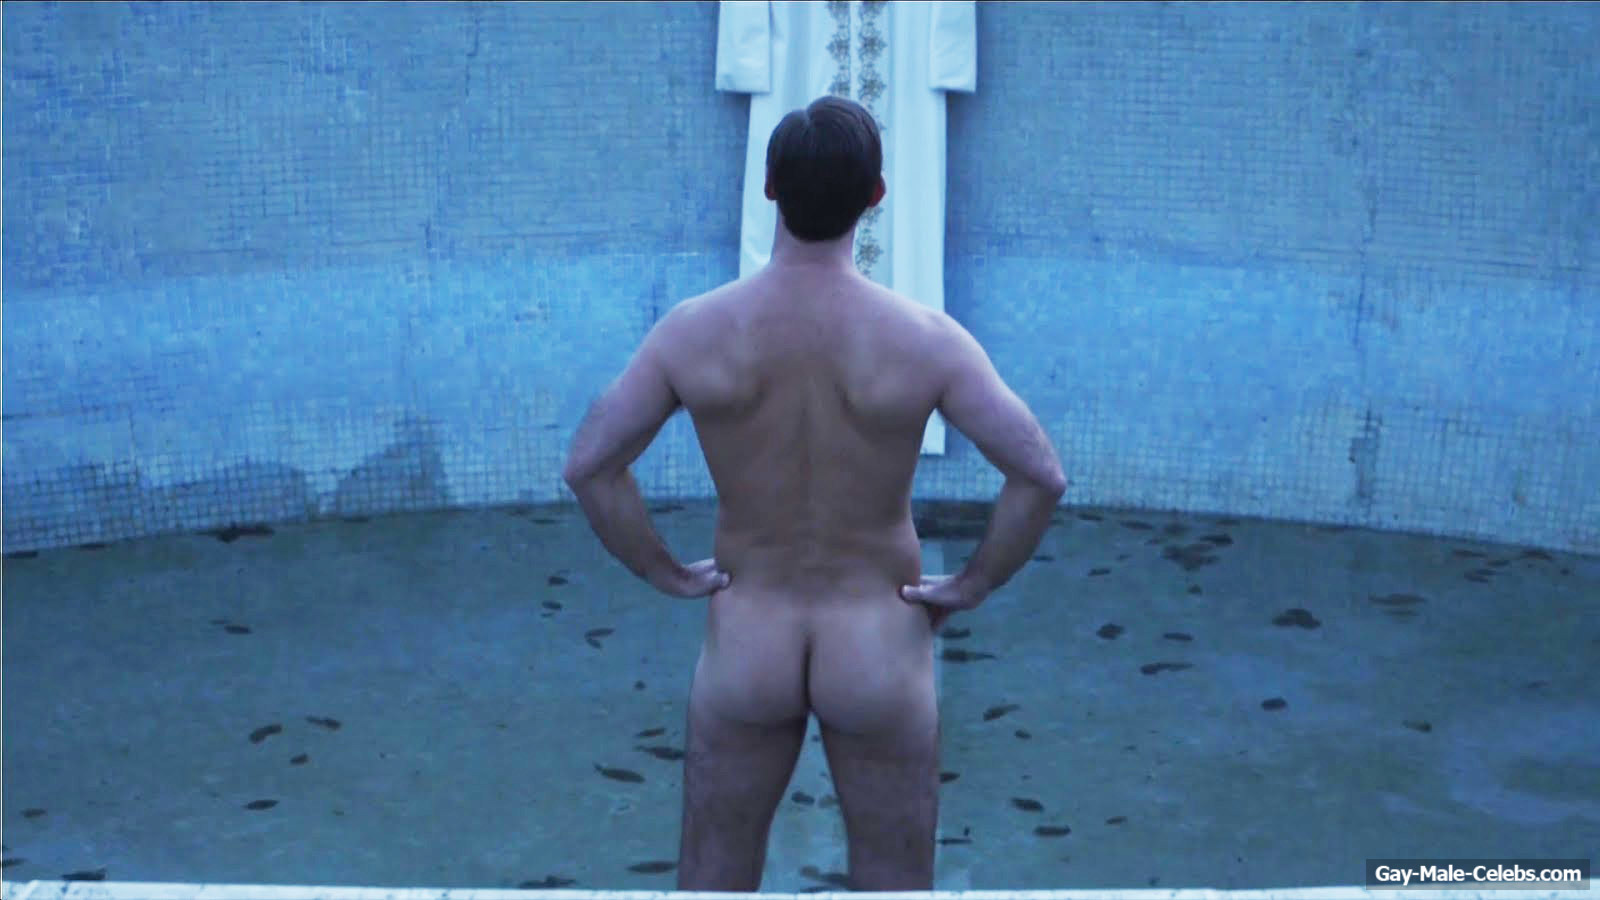 Jude Law Naked (4 Photos)